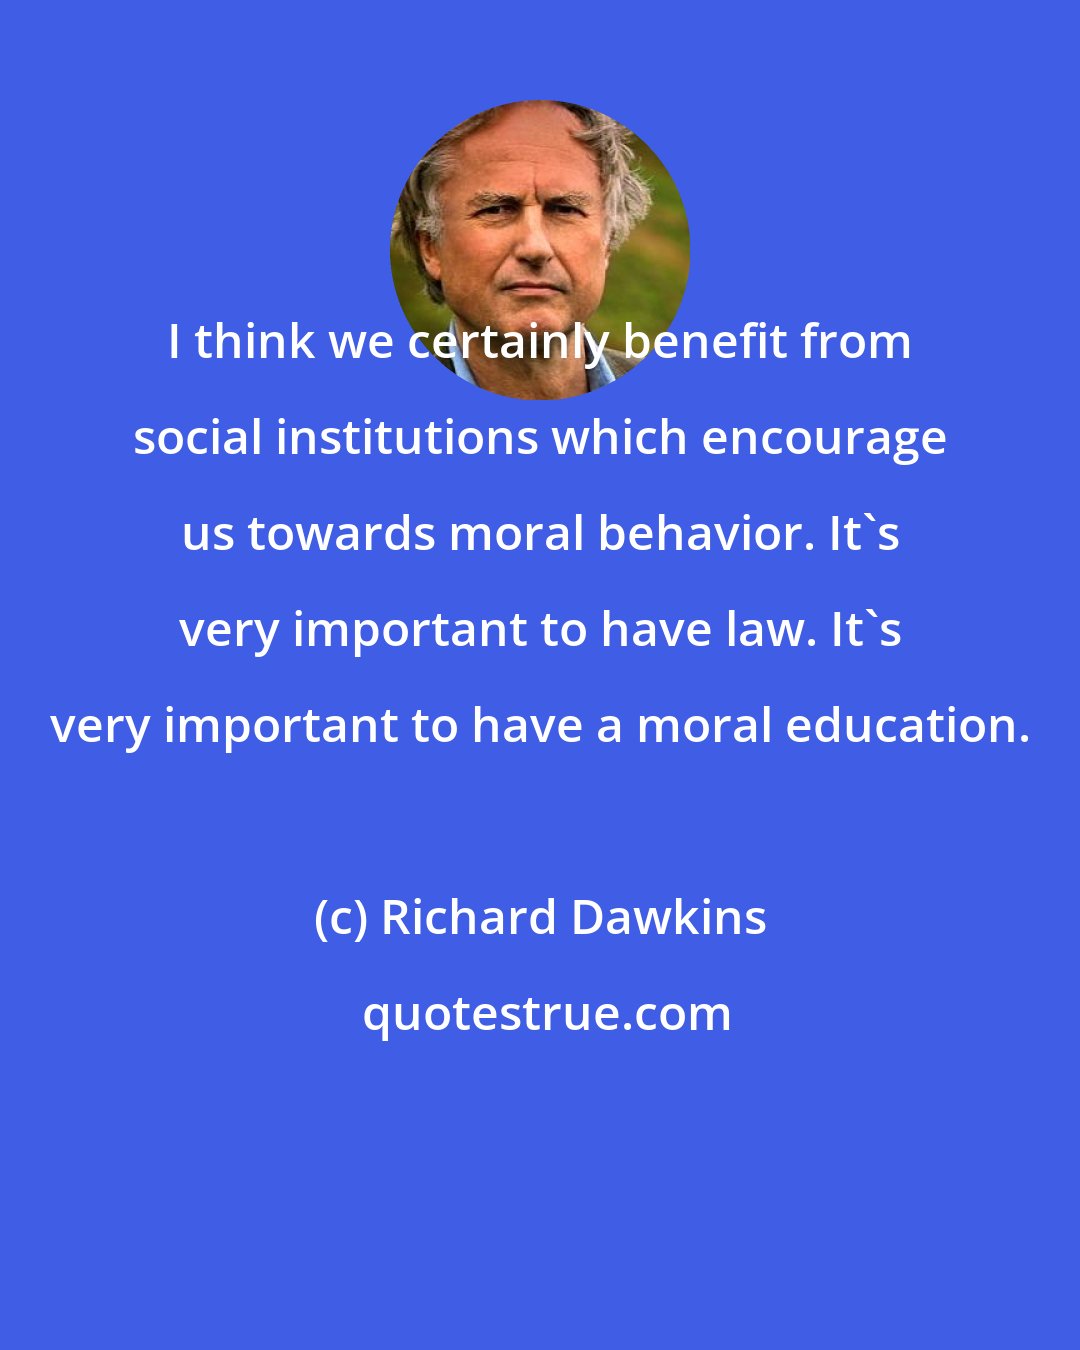 Richard Dawkins: I think we certainly benefit from social institutions which encourage us towards moral behavior. It's very important to have law. It's very important to have a moral education.